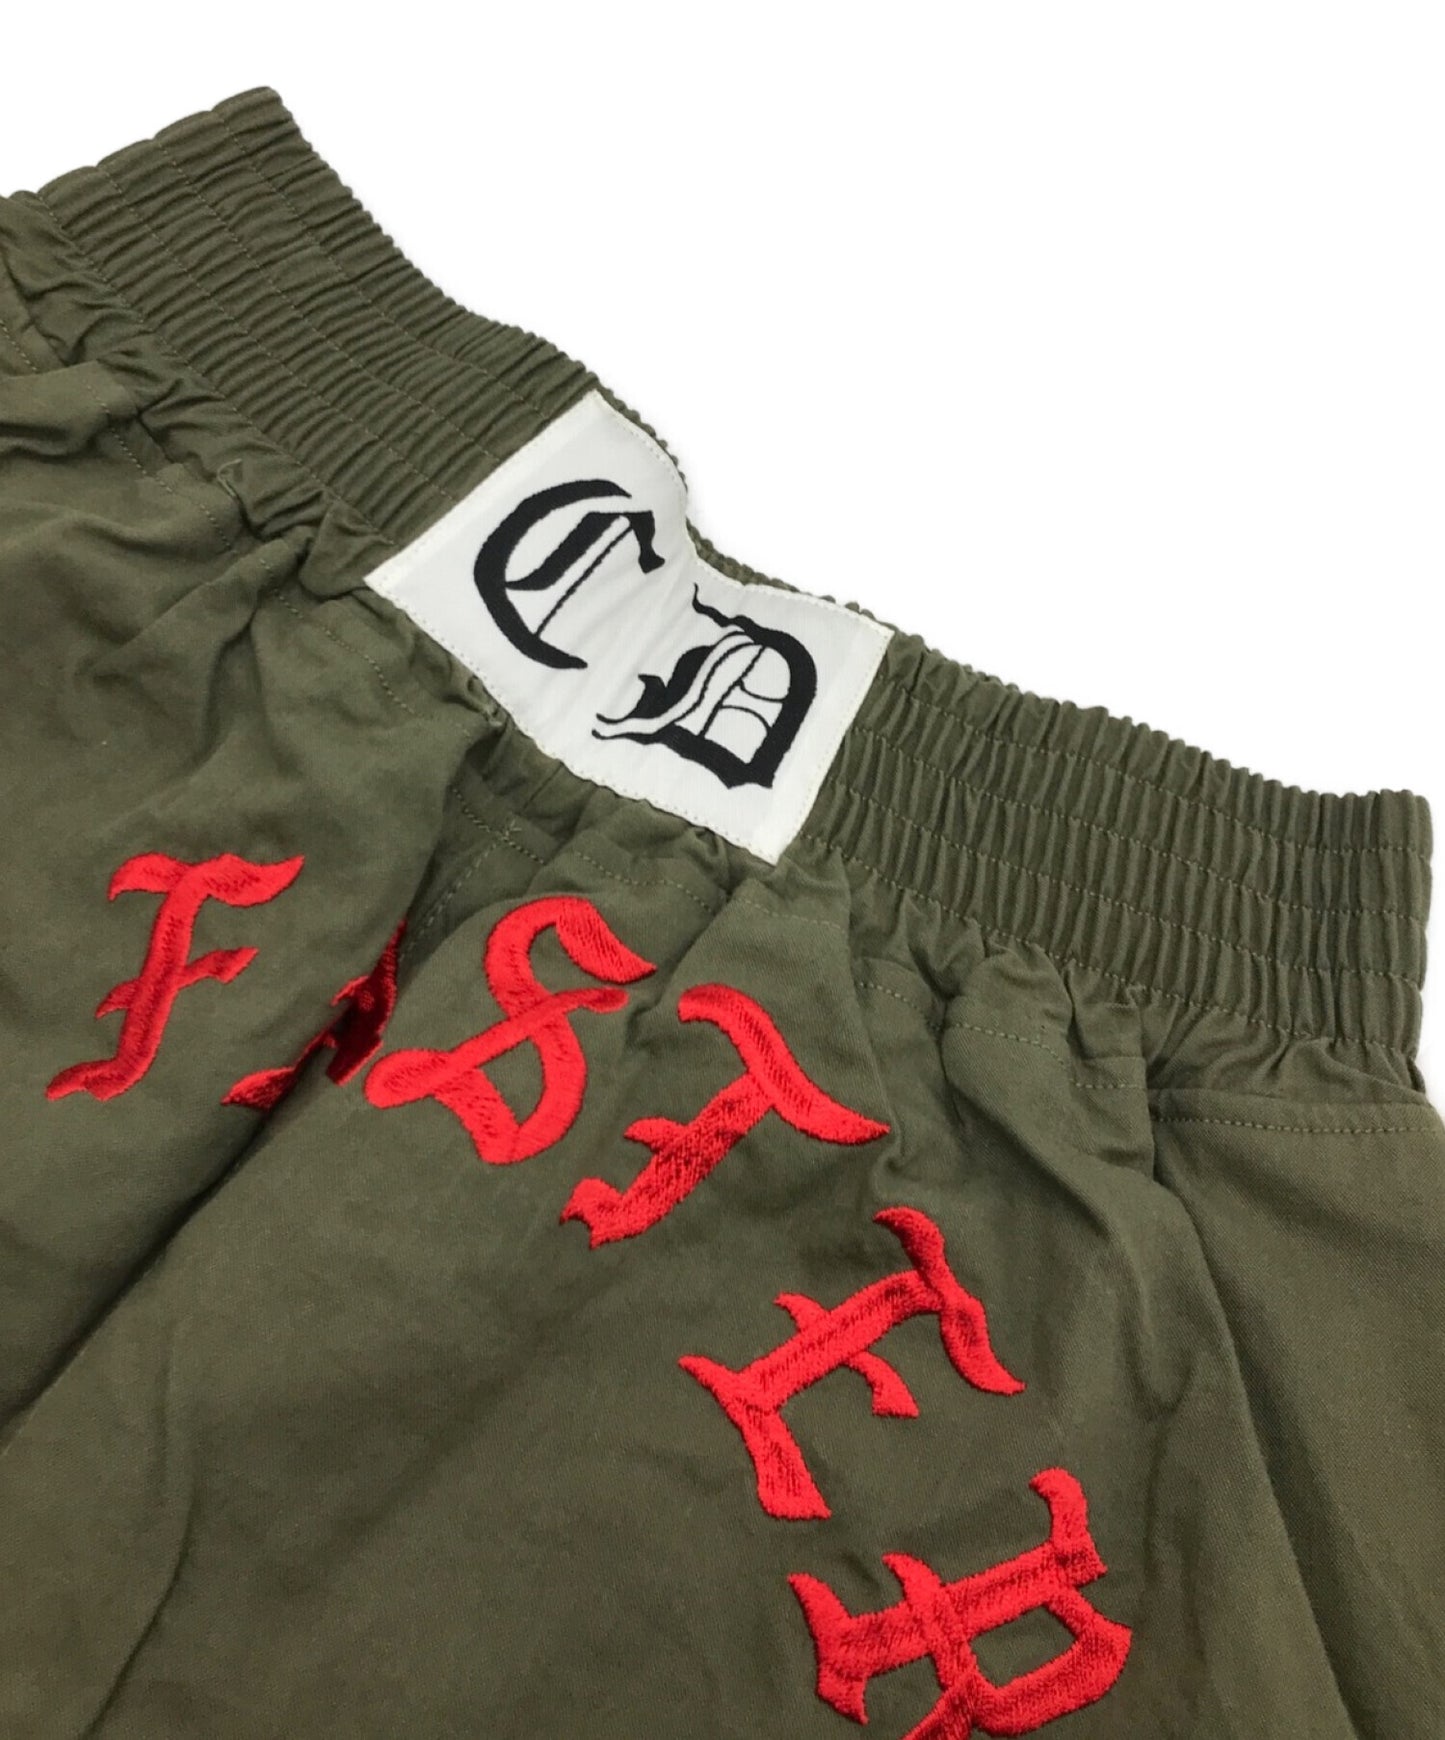 Readymade Boxing Shorts Re-Co-KH-00-00-87